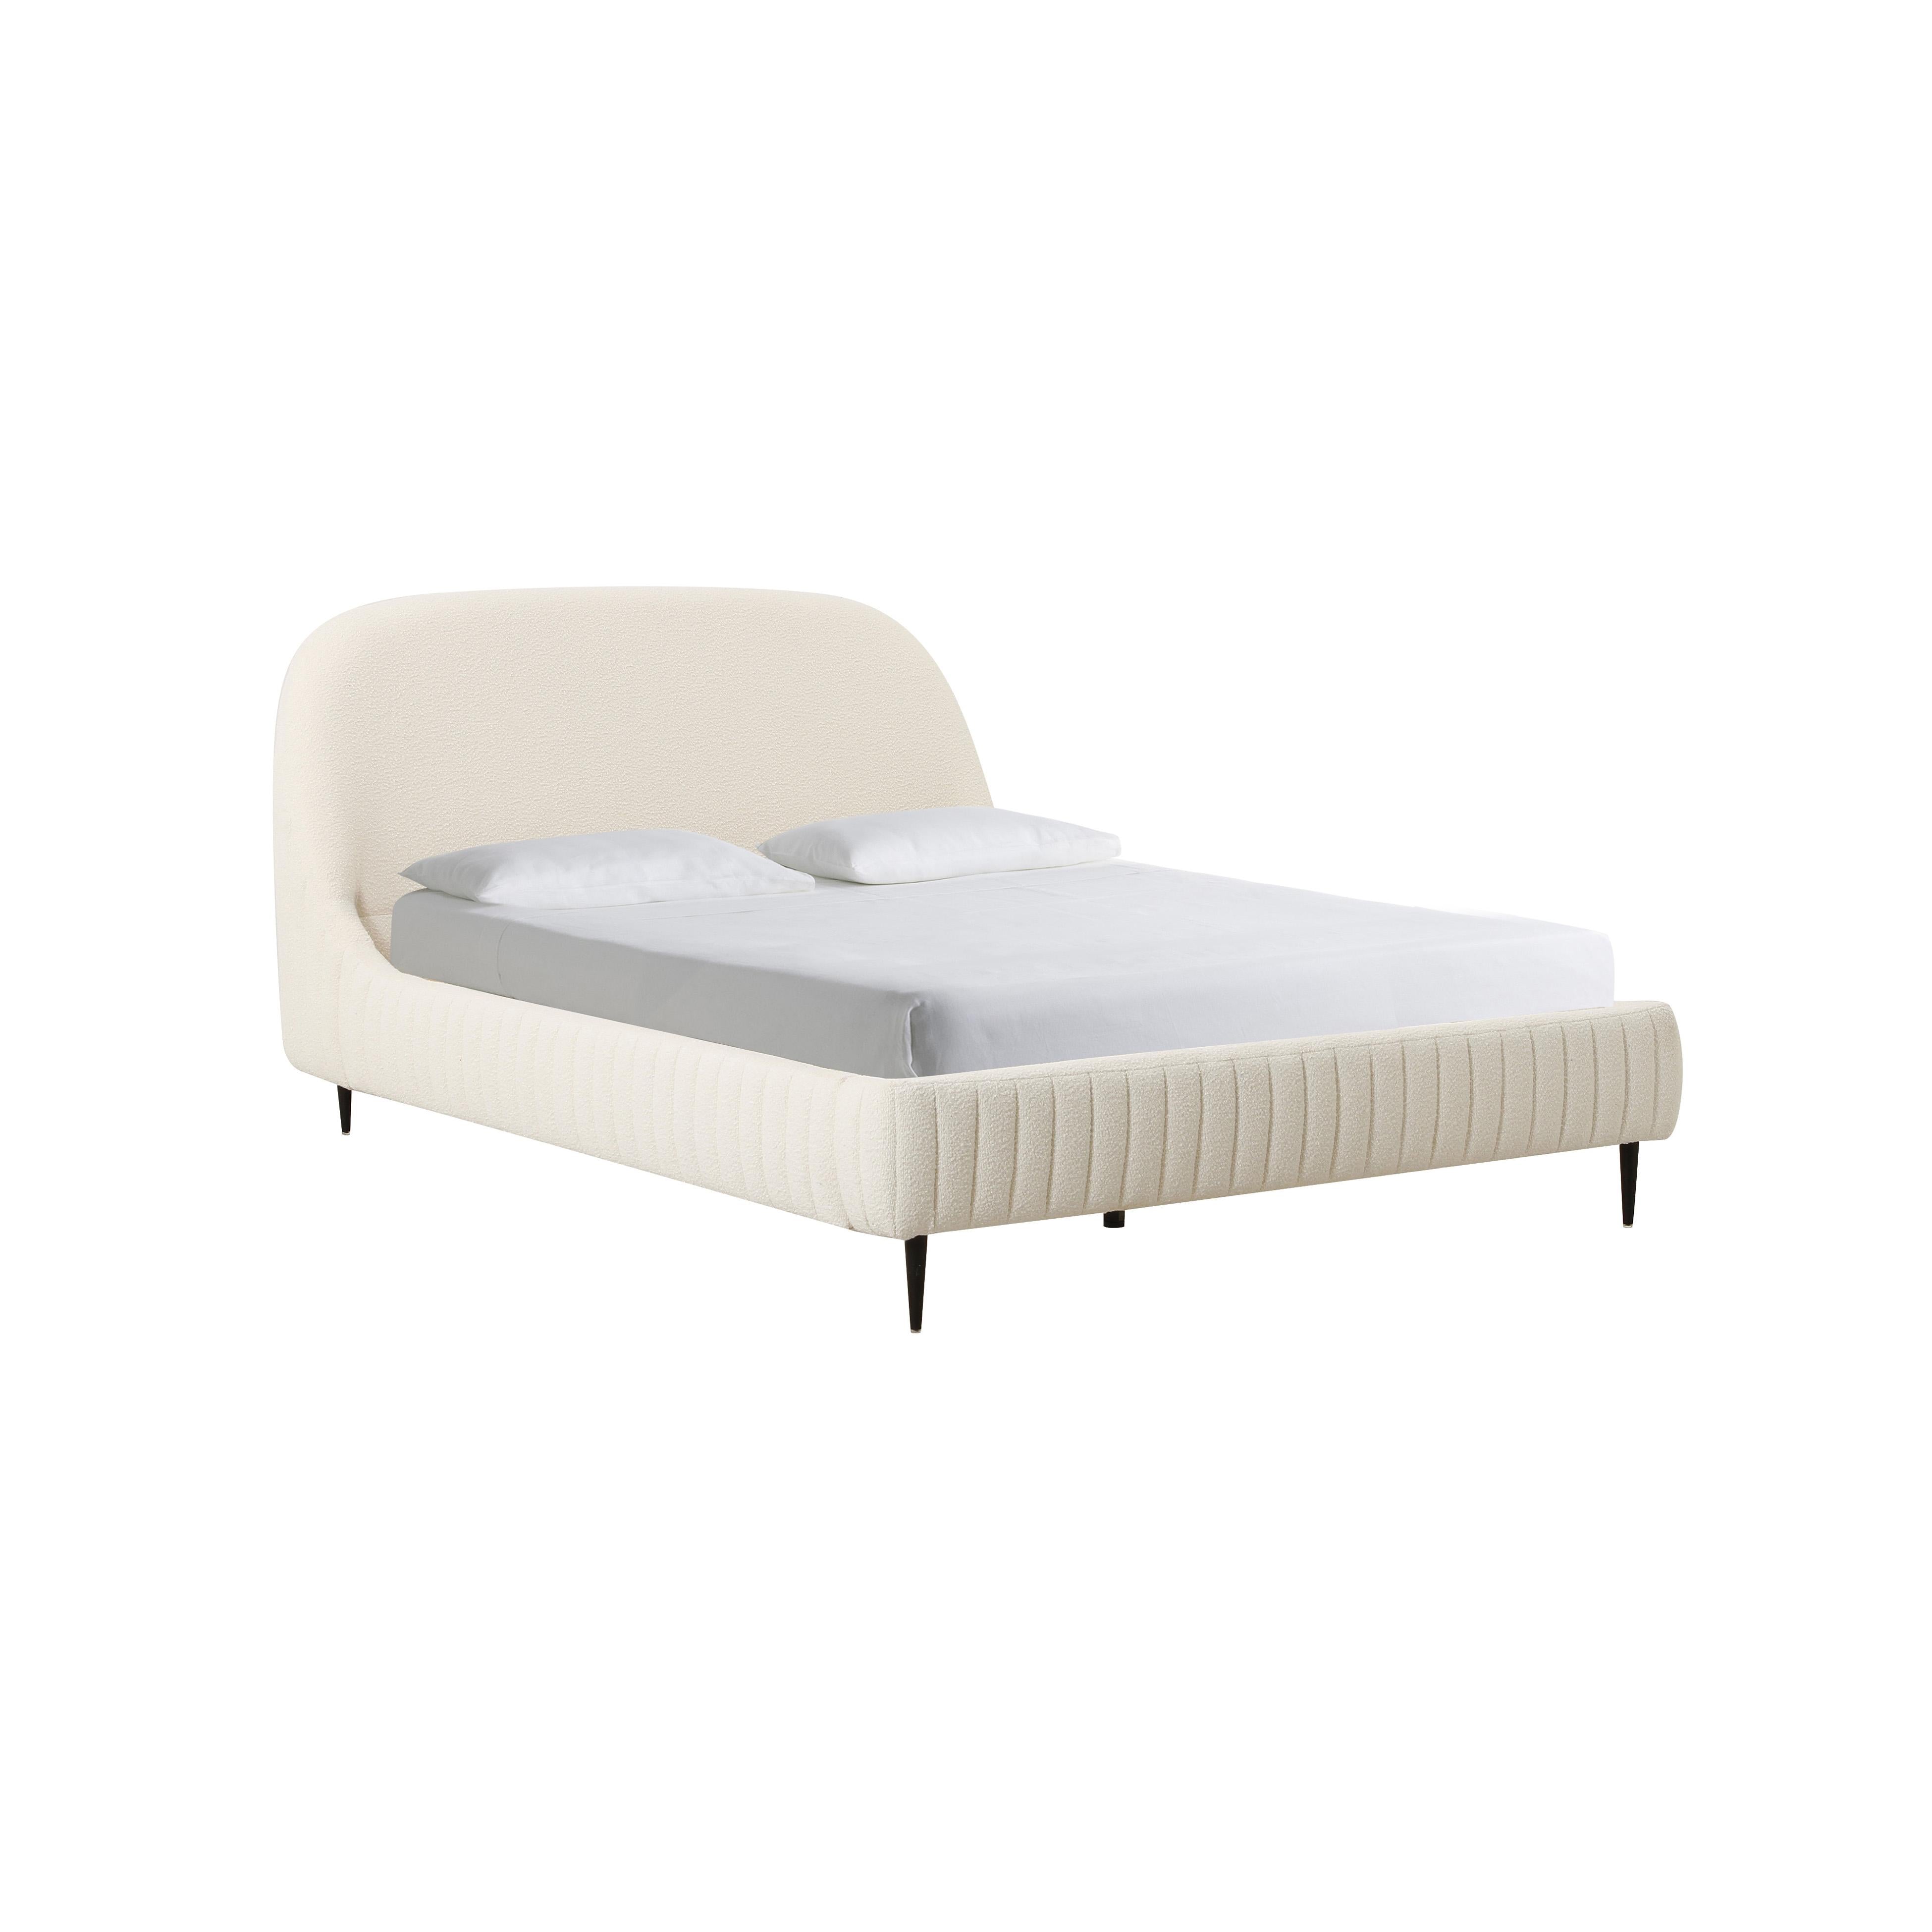 Tov Furniture Beds - Denise Cream Boucle Bed in Queen